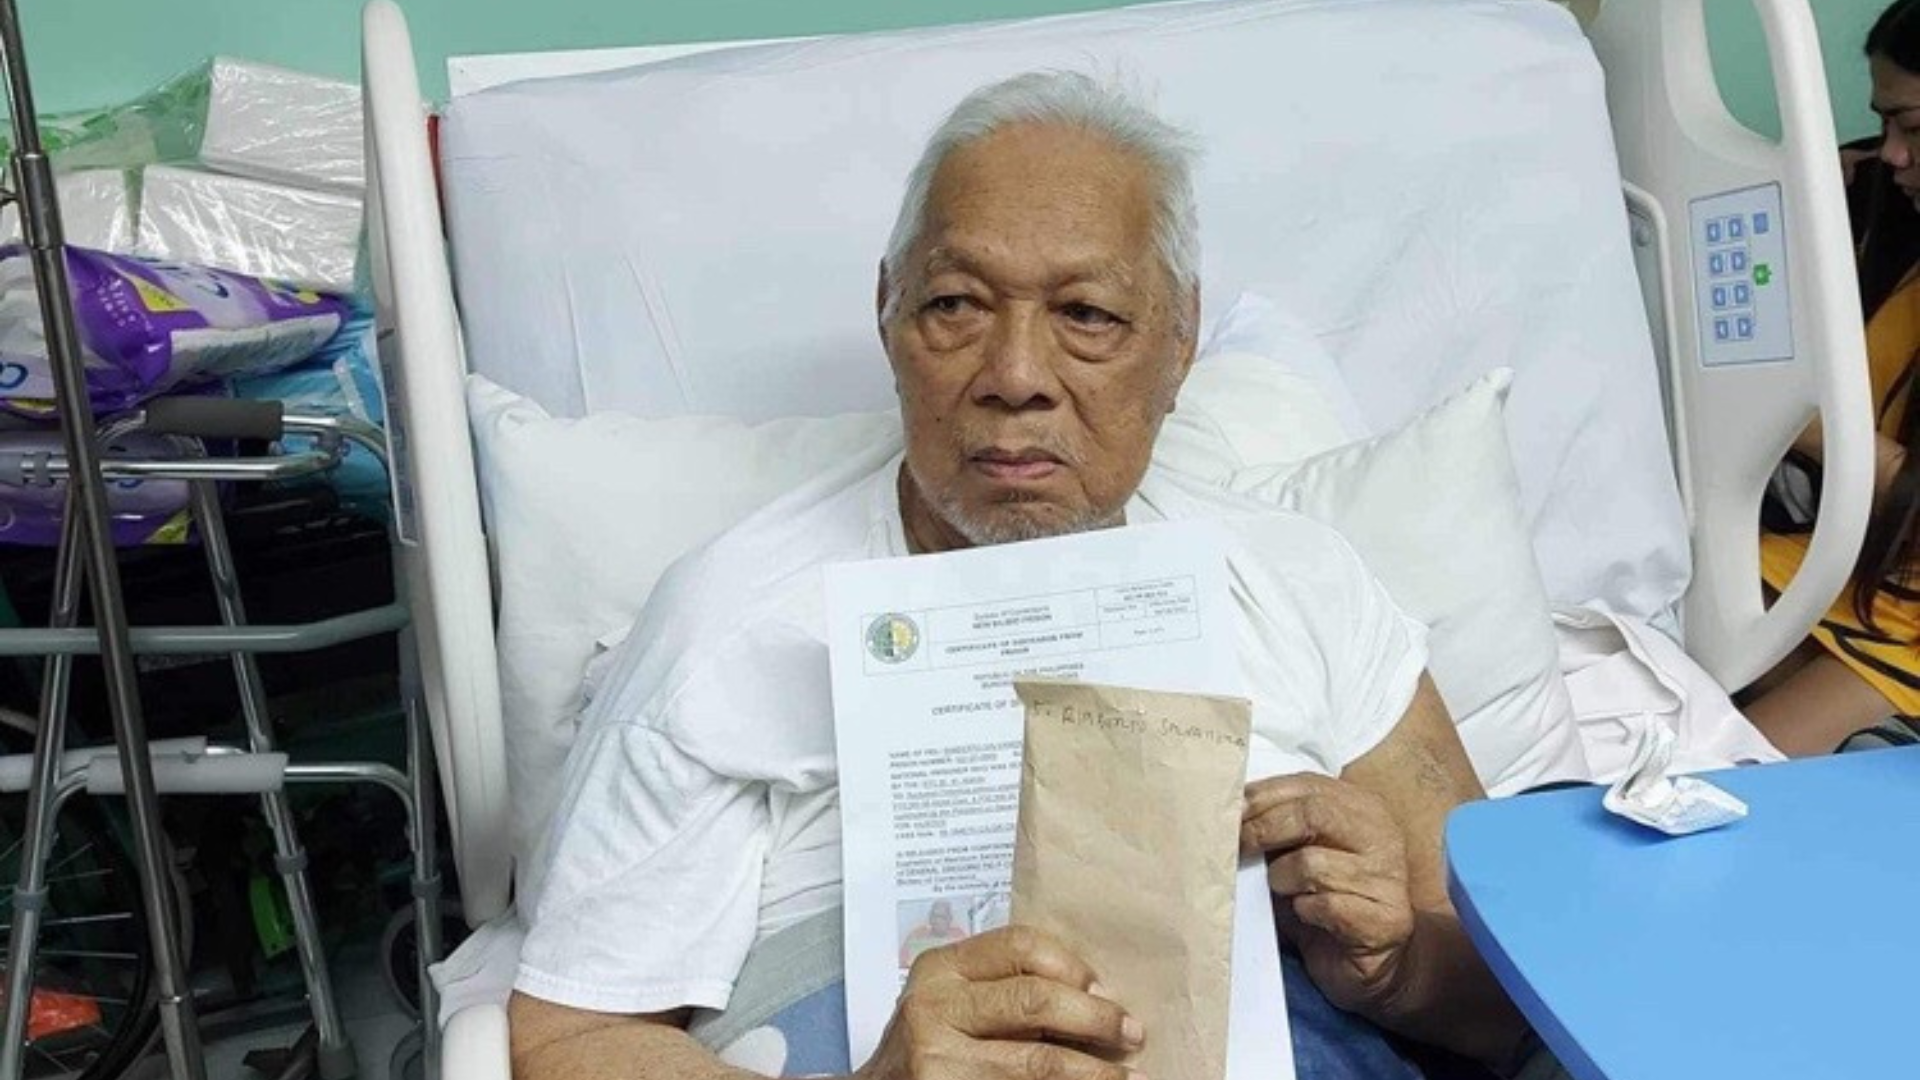 After 16 years in prison, convict freed at age 86 | Inquirer News